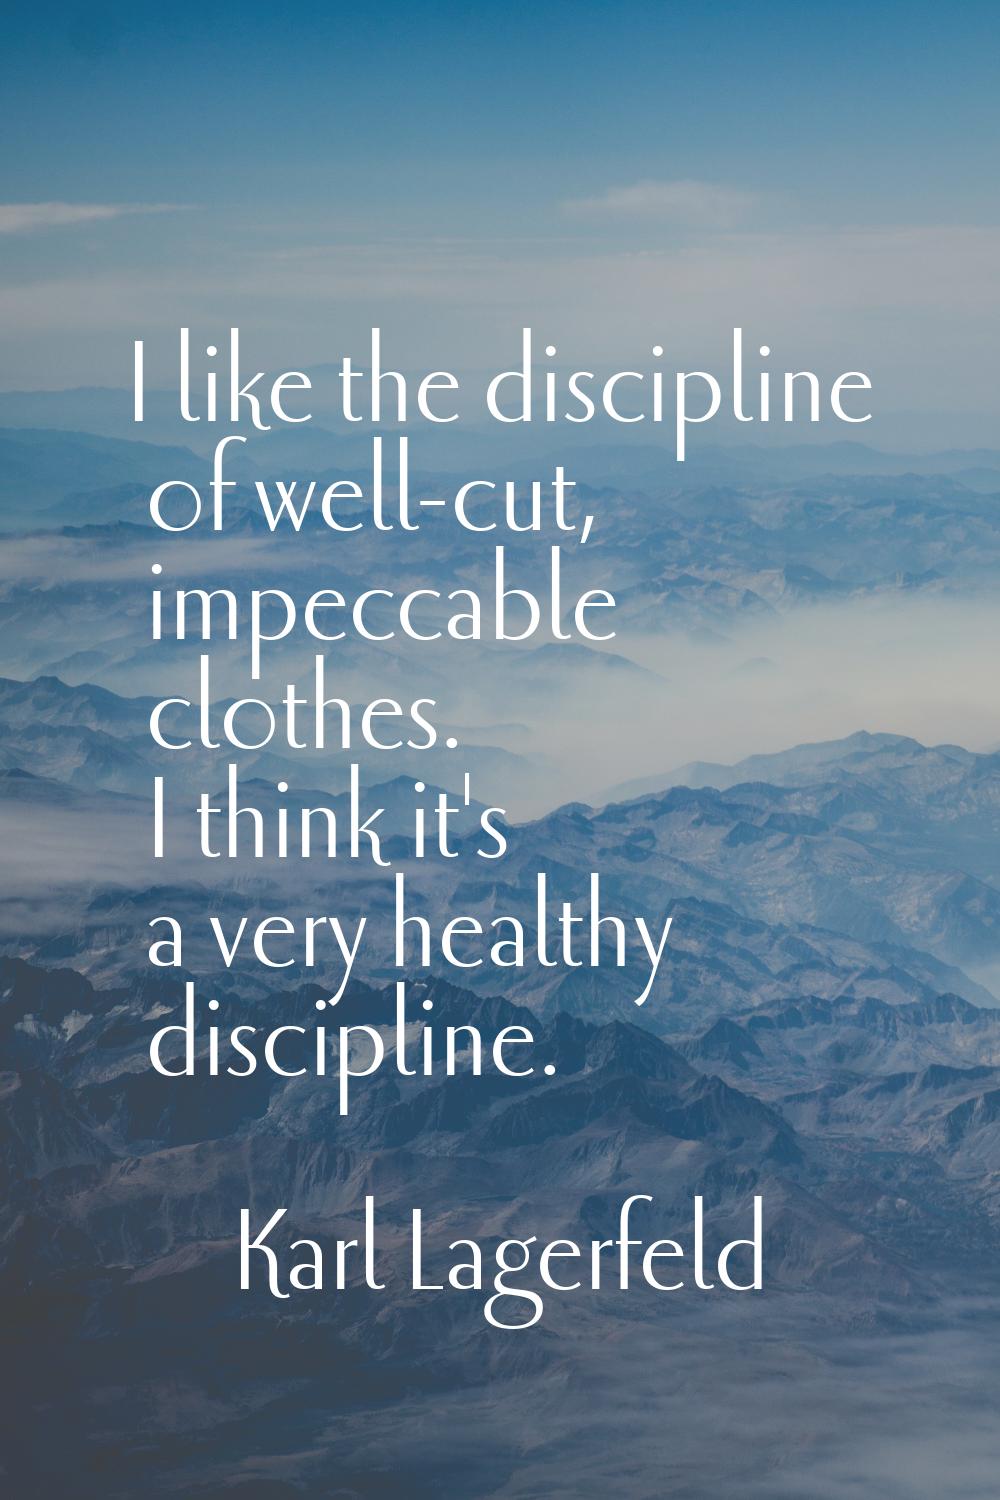 I like the discipline of well-cut, impeccable clothes. I think it's a very healthy discipline.